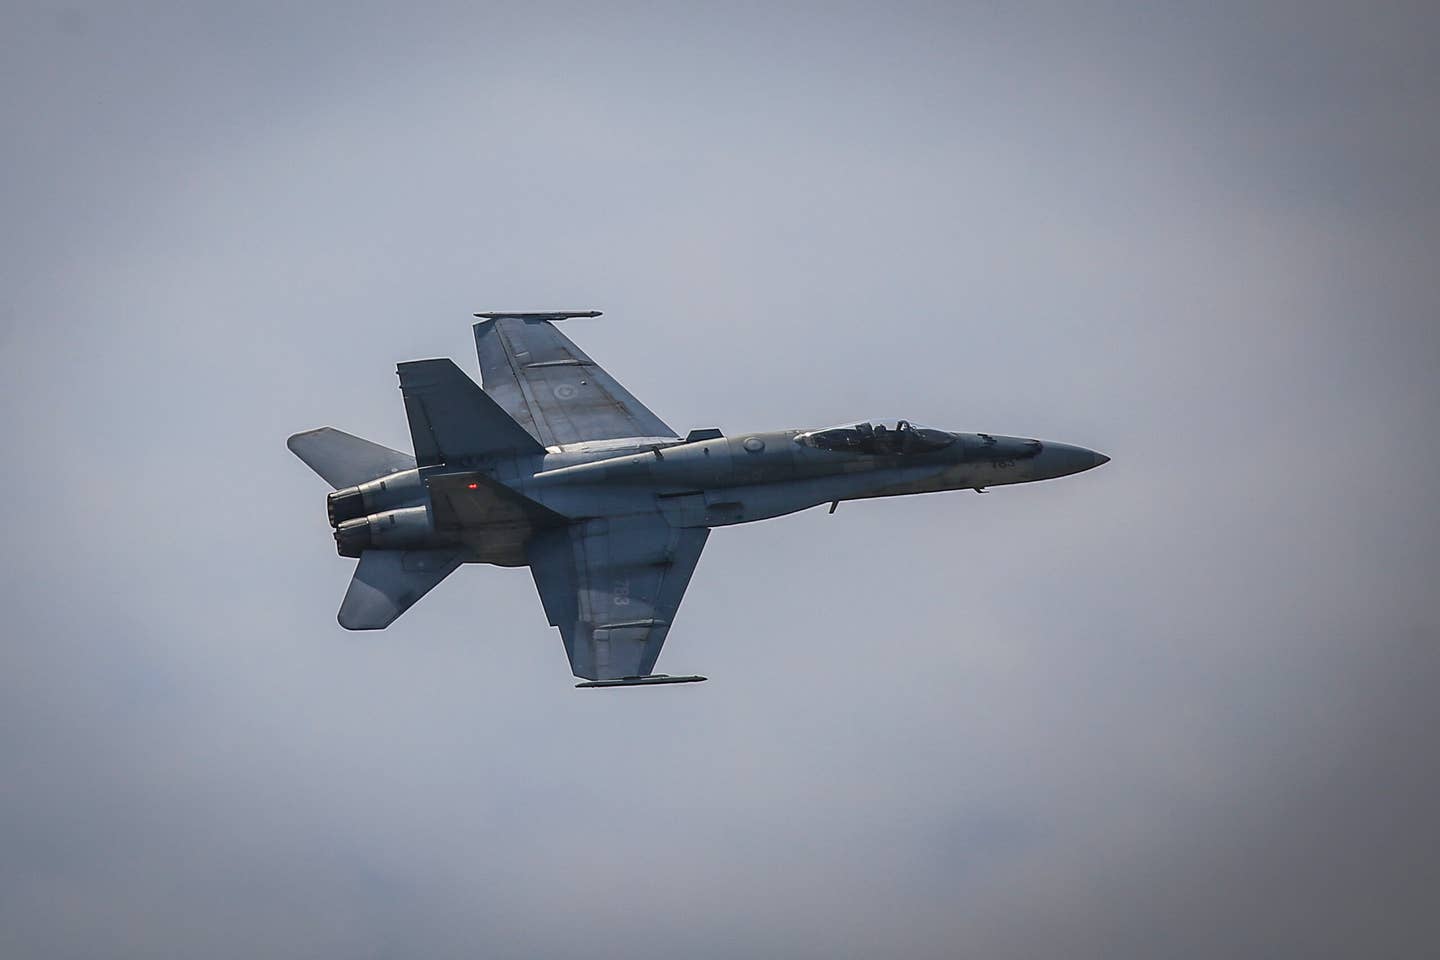 A Royal Canadian Air Force CF-18 performs over the 2018 Power in the Pines Open House and Air Show at Joint Base McGuire-Dix-Lakehurst, N.J., May 4, 2018. <em>Credit: U.S. Air National Guard photo by Master Sgt. Matt Hecht</em>